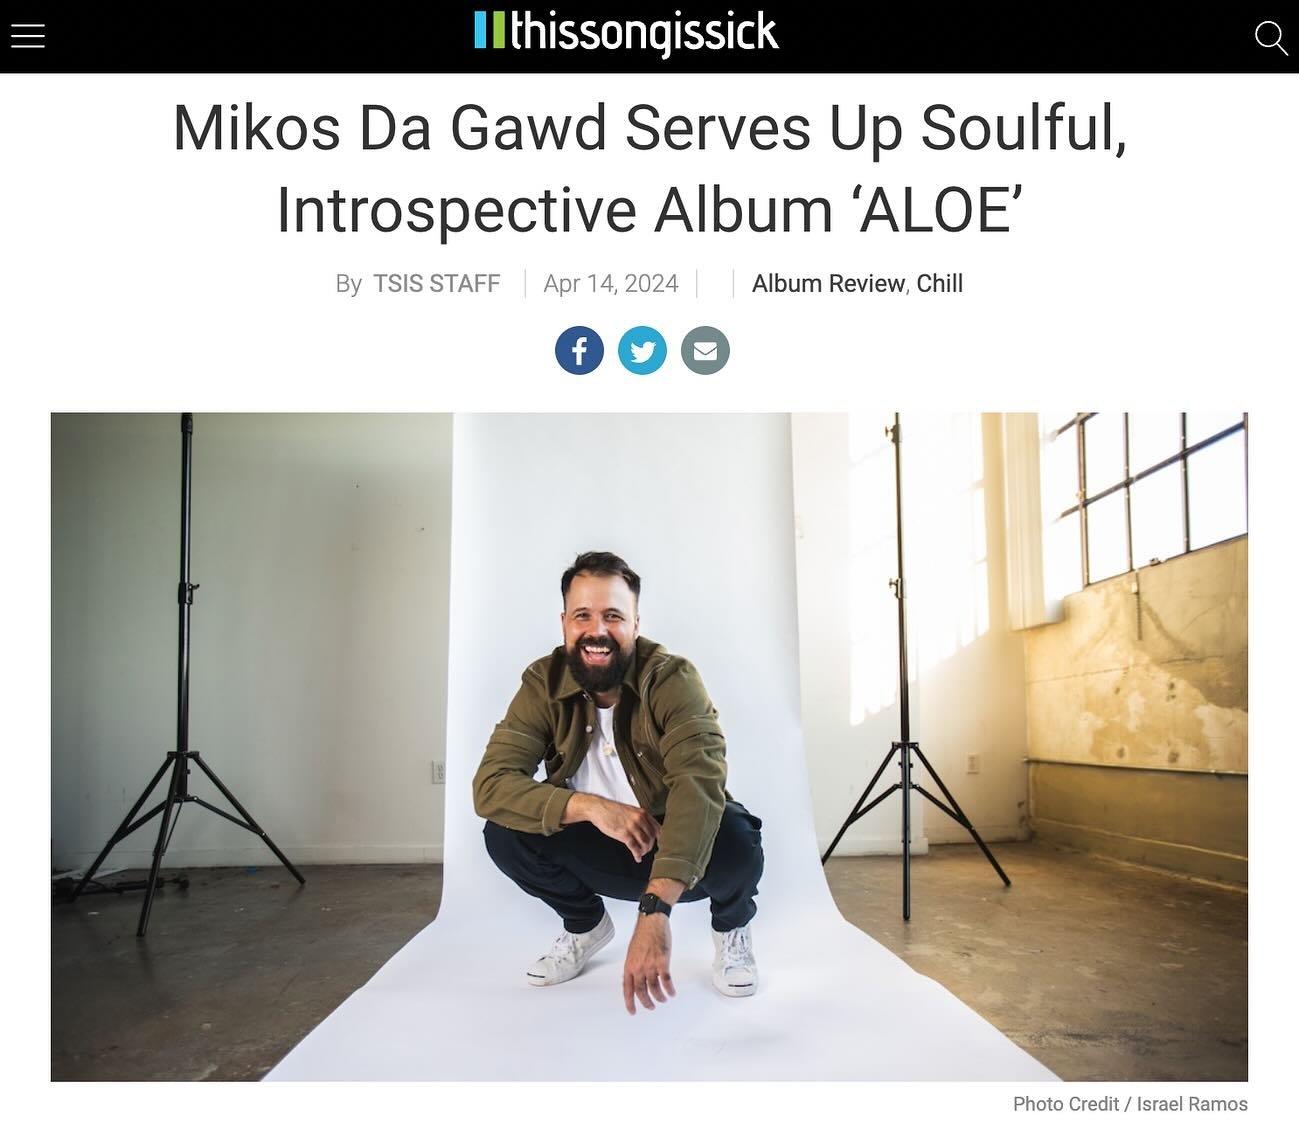 A &ldquo;masterful soundscape&rdquo; of fresh and funky tracks from @mikosdagawd 🙏🏼 swipe to see how he gets the soul in his signature production style

ty @thissongissick!

ALOE
1.  Inertia
2. Blue Liquid
3. Classic Sh**
4. Oasis
5. Manifesting th